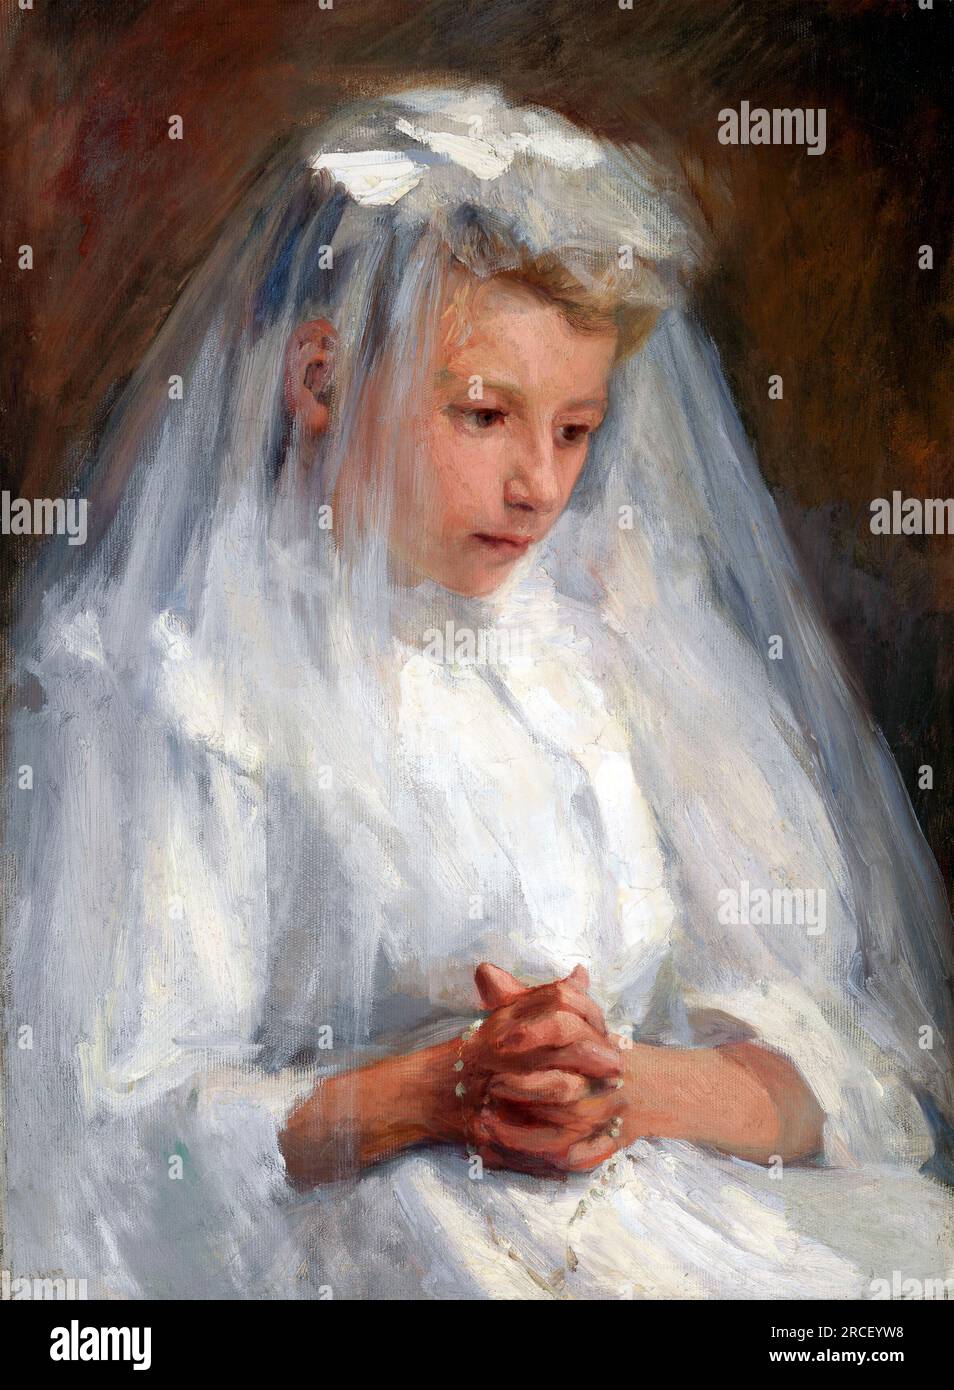 Caroloine A Lord. First Communion by the American artist, Caroline Augusta Lord (1860-1927), oil on canvas, 1901 Stock Photo